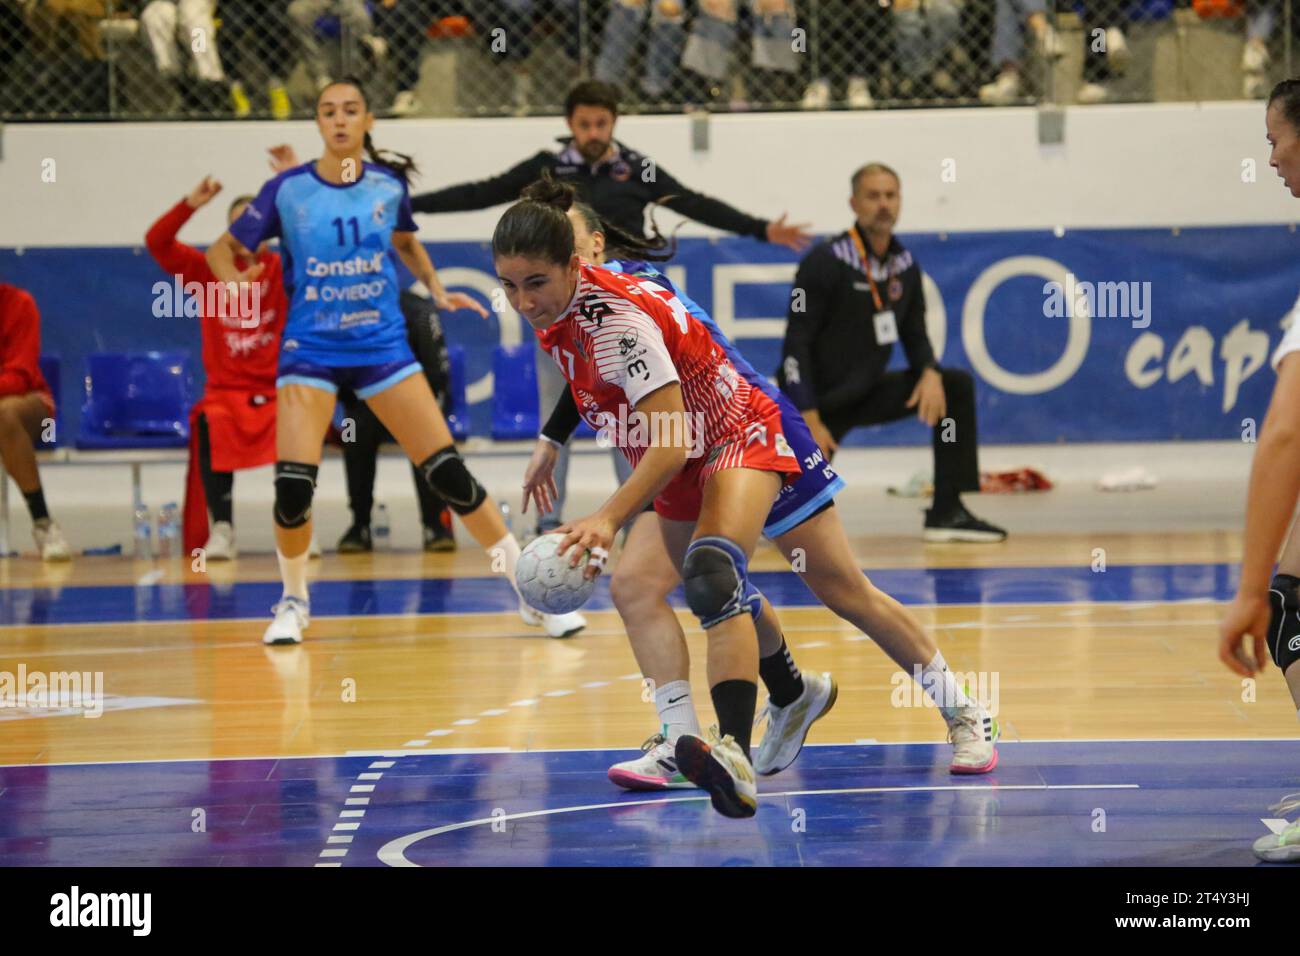 Oviedo, Spain. 1st Nov, 2023. Motive.co Gijon Balonmano La Calzada's player, Nayla de Andres (47) steals the ball during the 9th matchday of the Liga Guerreras Iberdrola between Lobas Global Atac Oviedo and Motive.co Gijon La Calzada Handball, on November 1, 2023, at the Florida Arena Municipal Sports Center, in Oviedo, Spain. (Photo by Alberto Brevers/Pacific Press) Credit: Pacific Press Media Production Corp./Alamy Live News Stock Photo